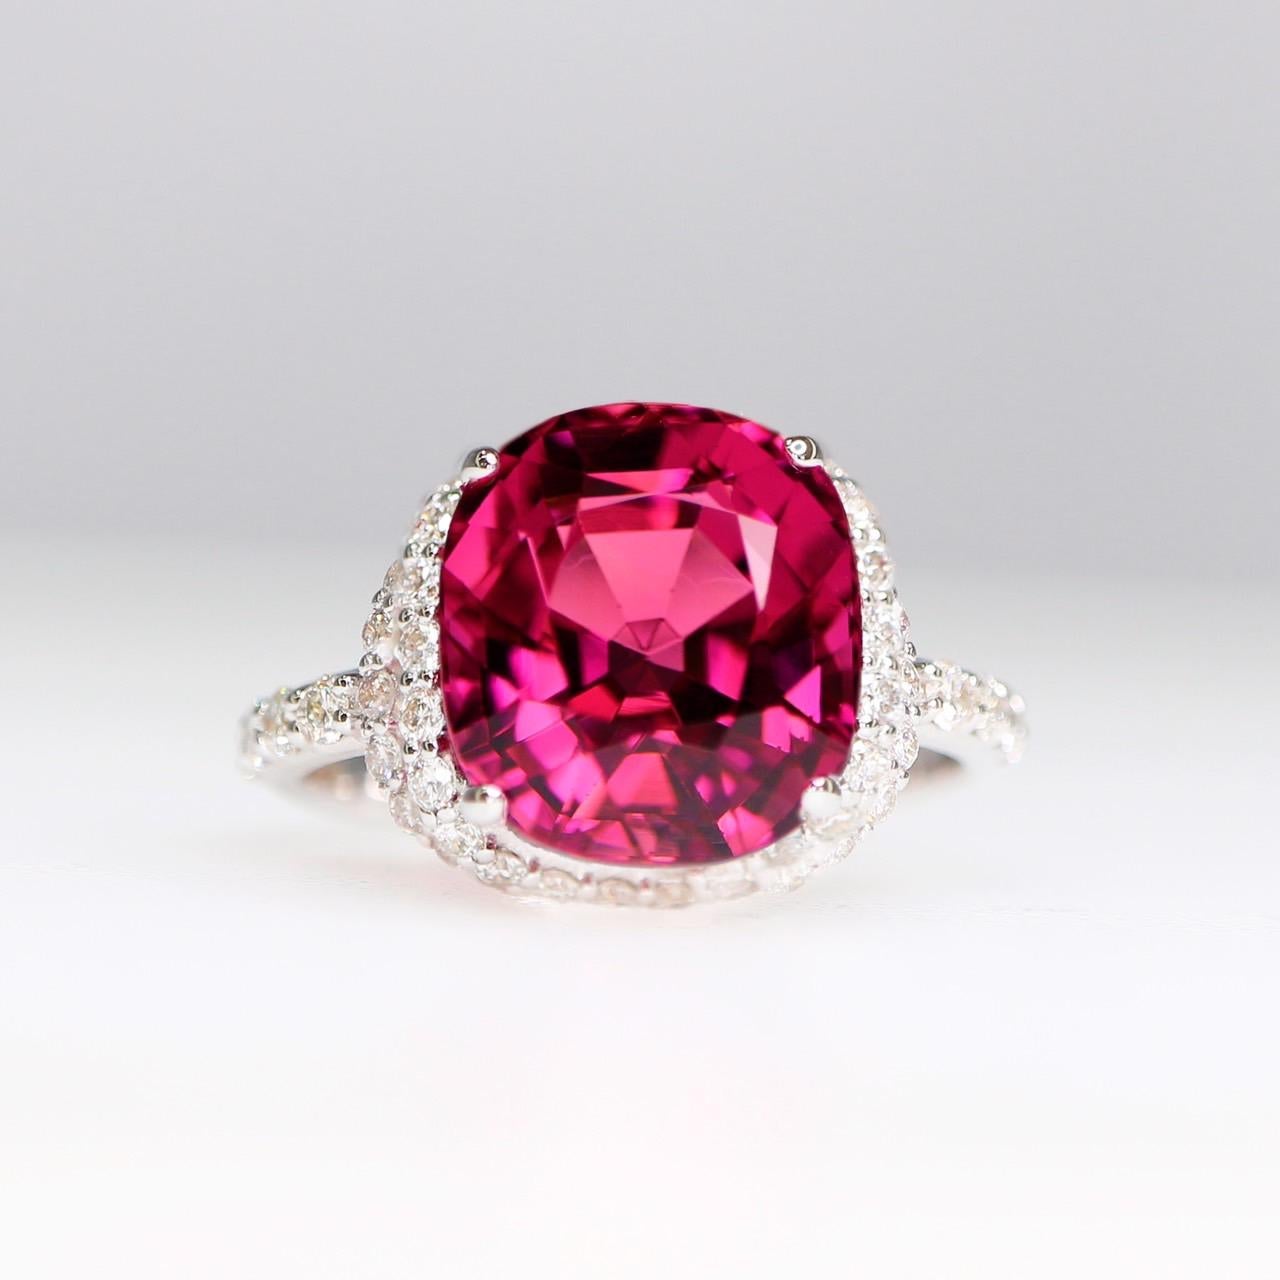 Cushion Cut *NRP* GIA 14K 4.90 Ct Top Pink Tourmaline Antique Art Deco Style Engagement Ring